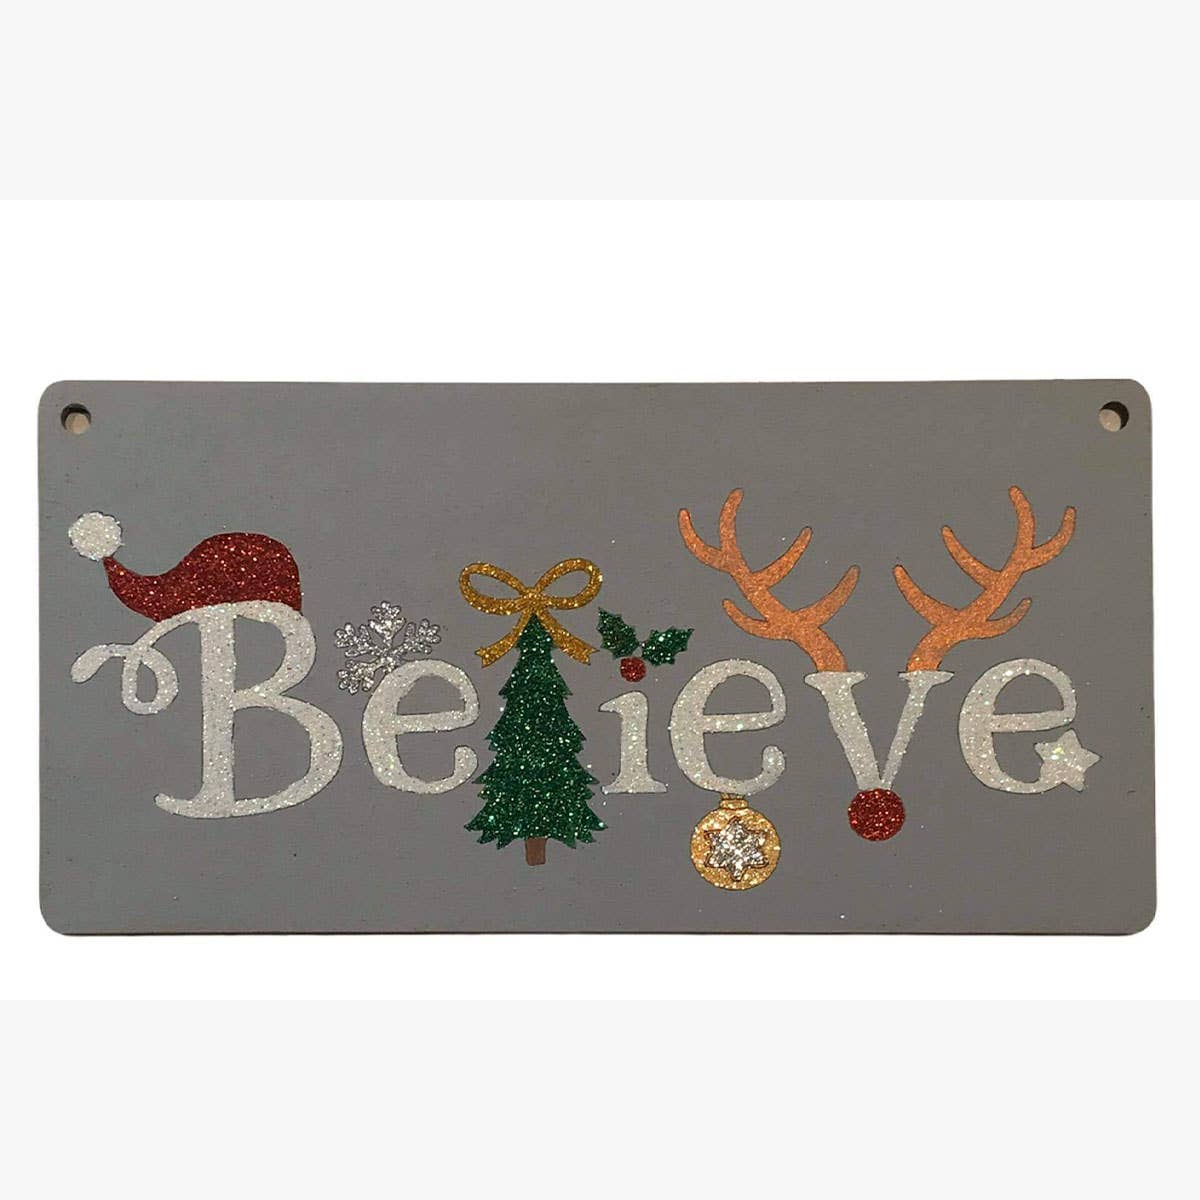 Believe' Christmas Hanging Sign